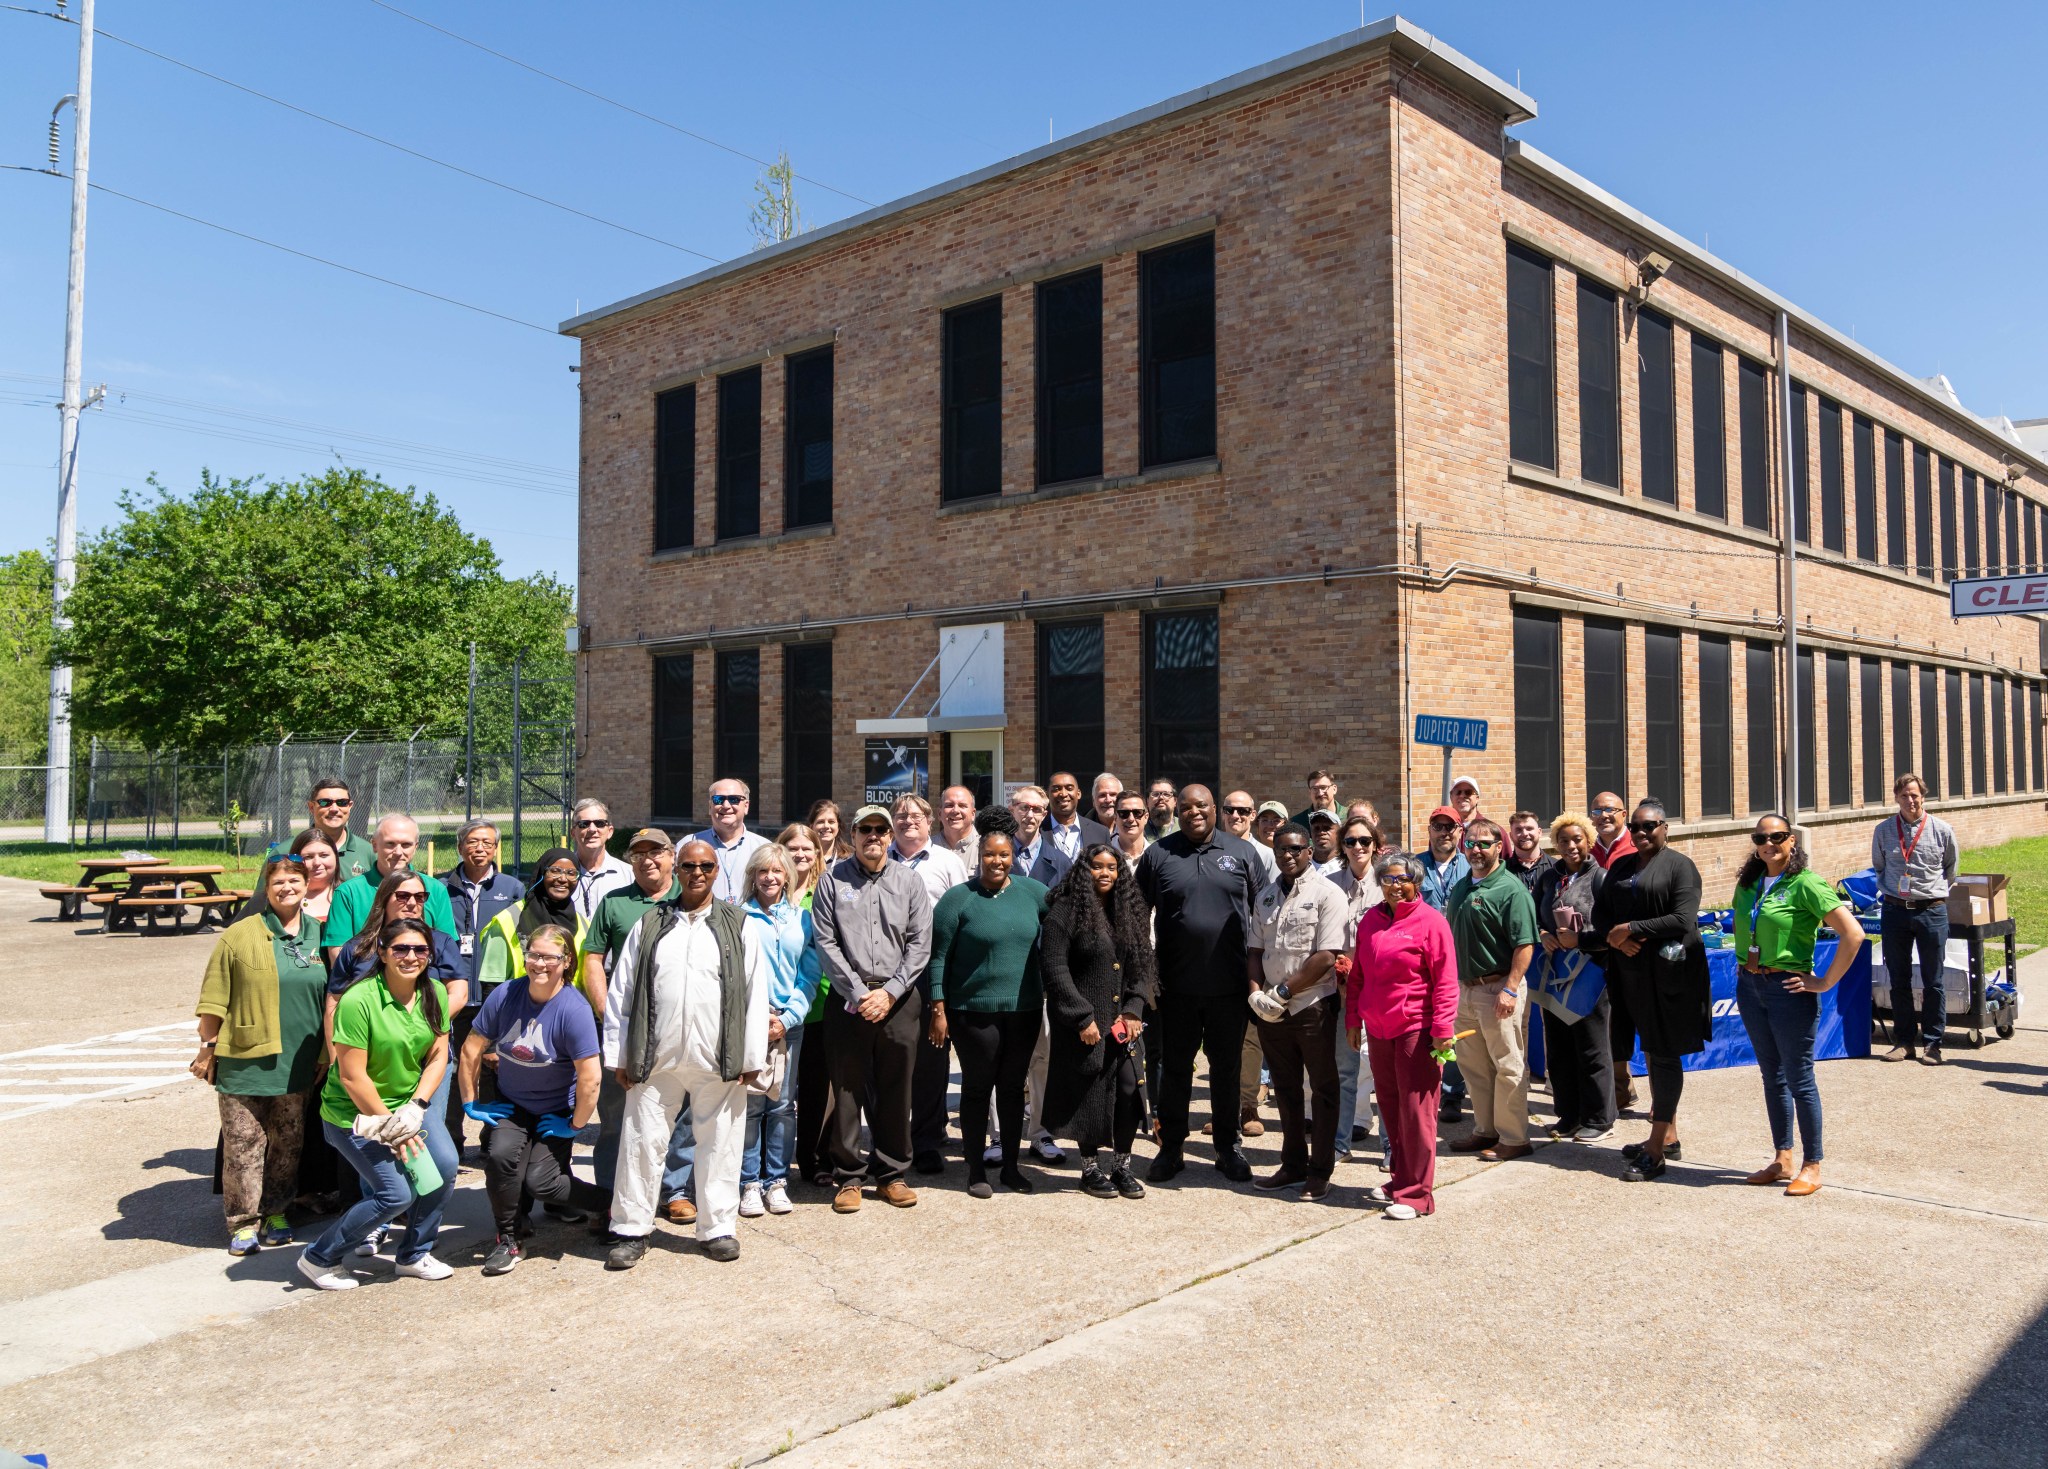 Nearly 50 employees from NASA, Boeing, Lockheed Martin, Syncom Space Services (S3), Textron, and various other contractors worked together to weed flower beds and pick up litter and debris around the 829-acre site on Earth Day.